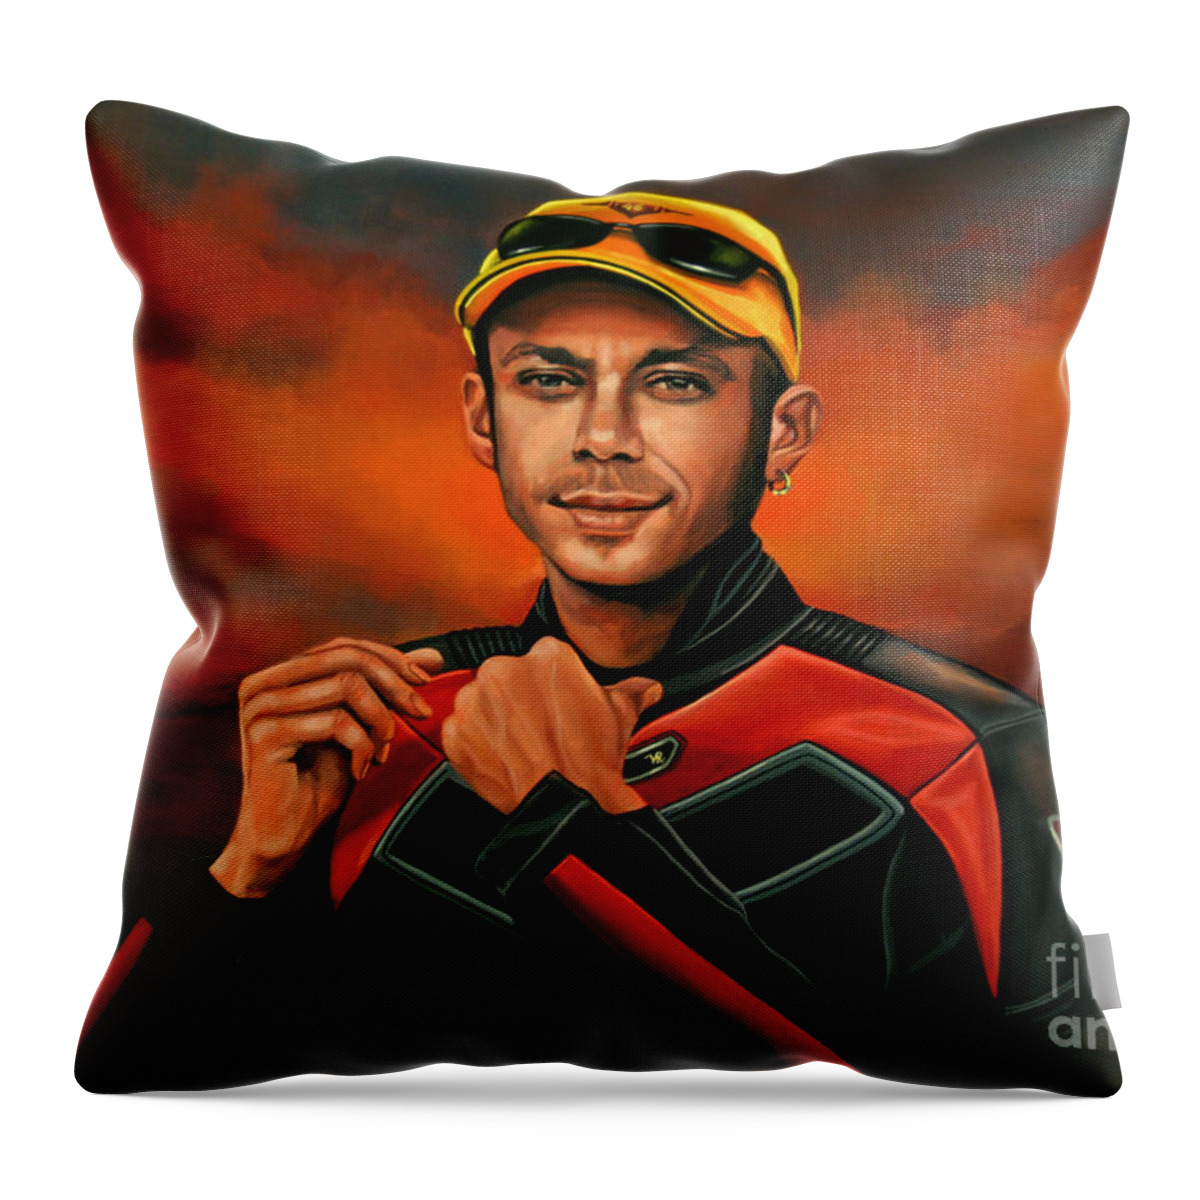 Valentino Rossi Throw Pillow featuring the painting Valentino Rossi by Paul Meijering